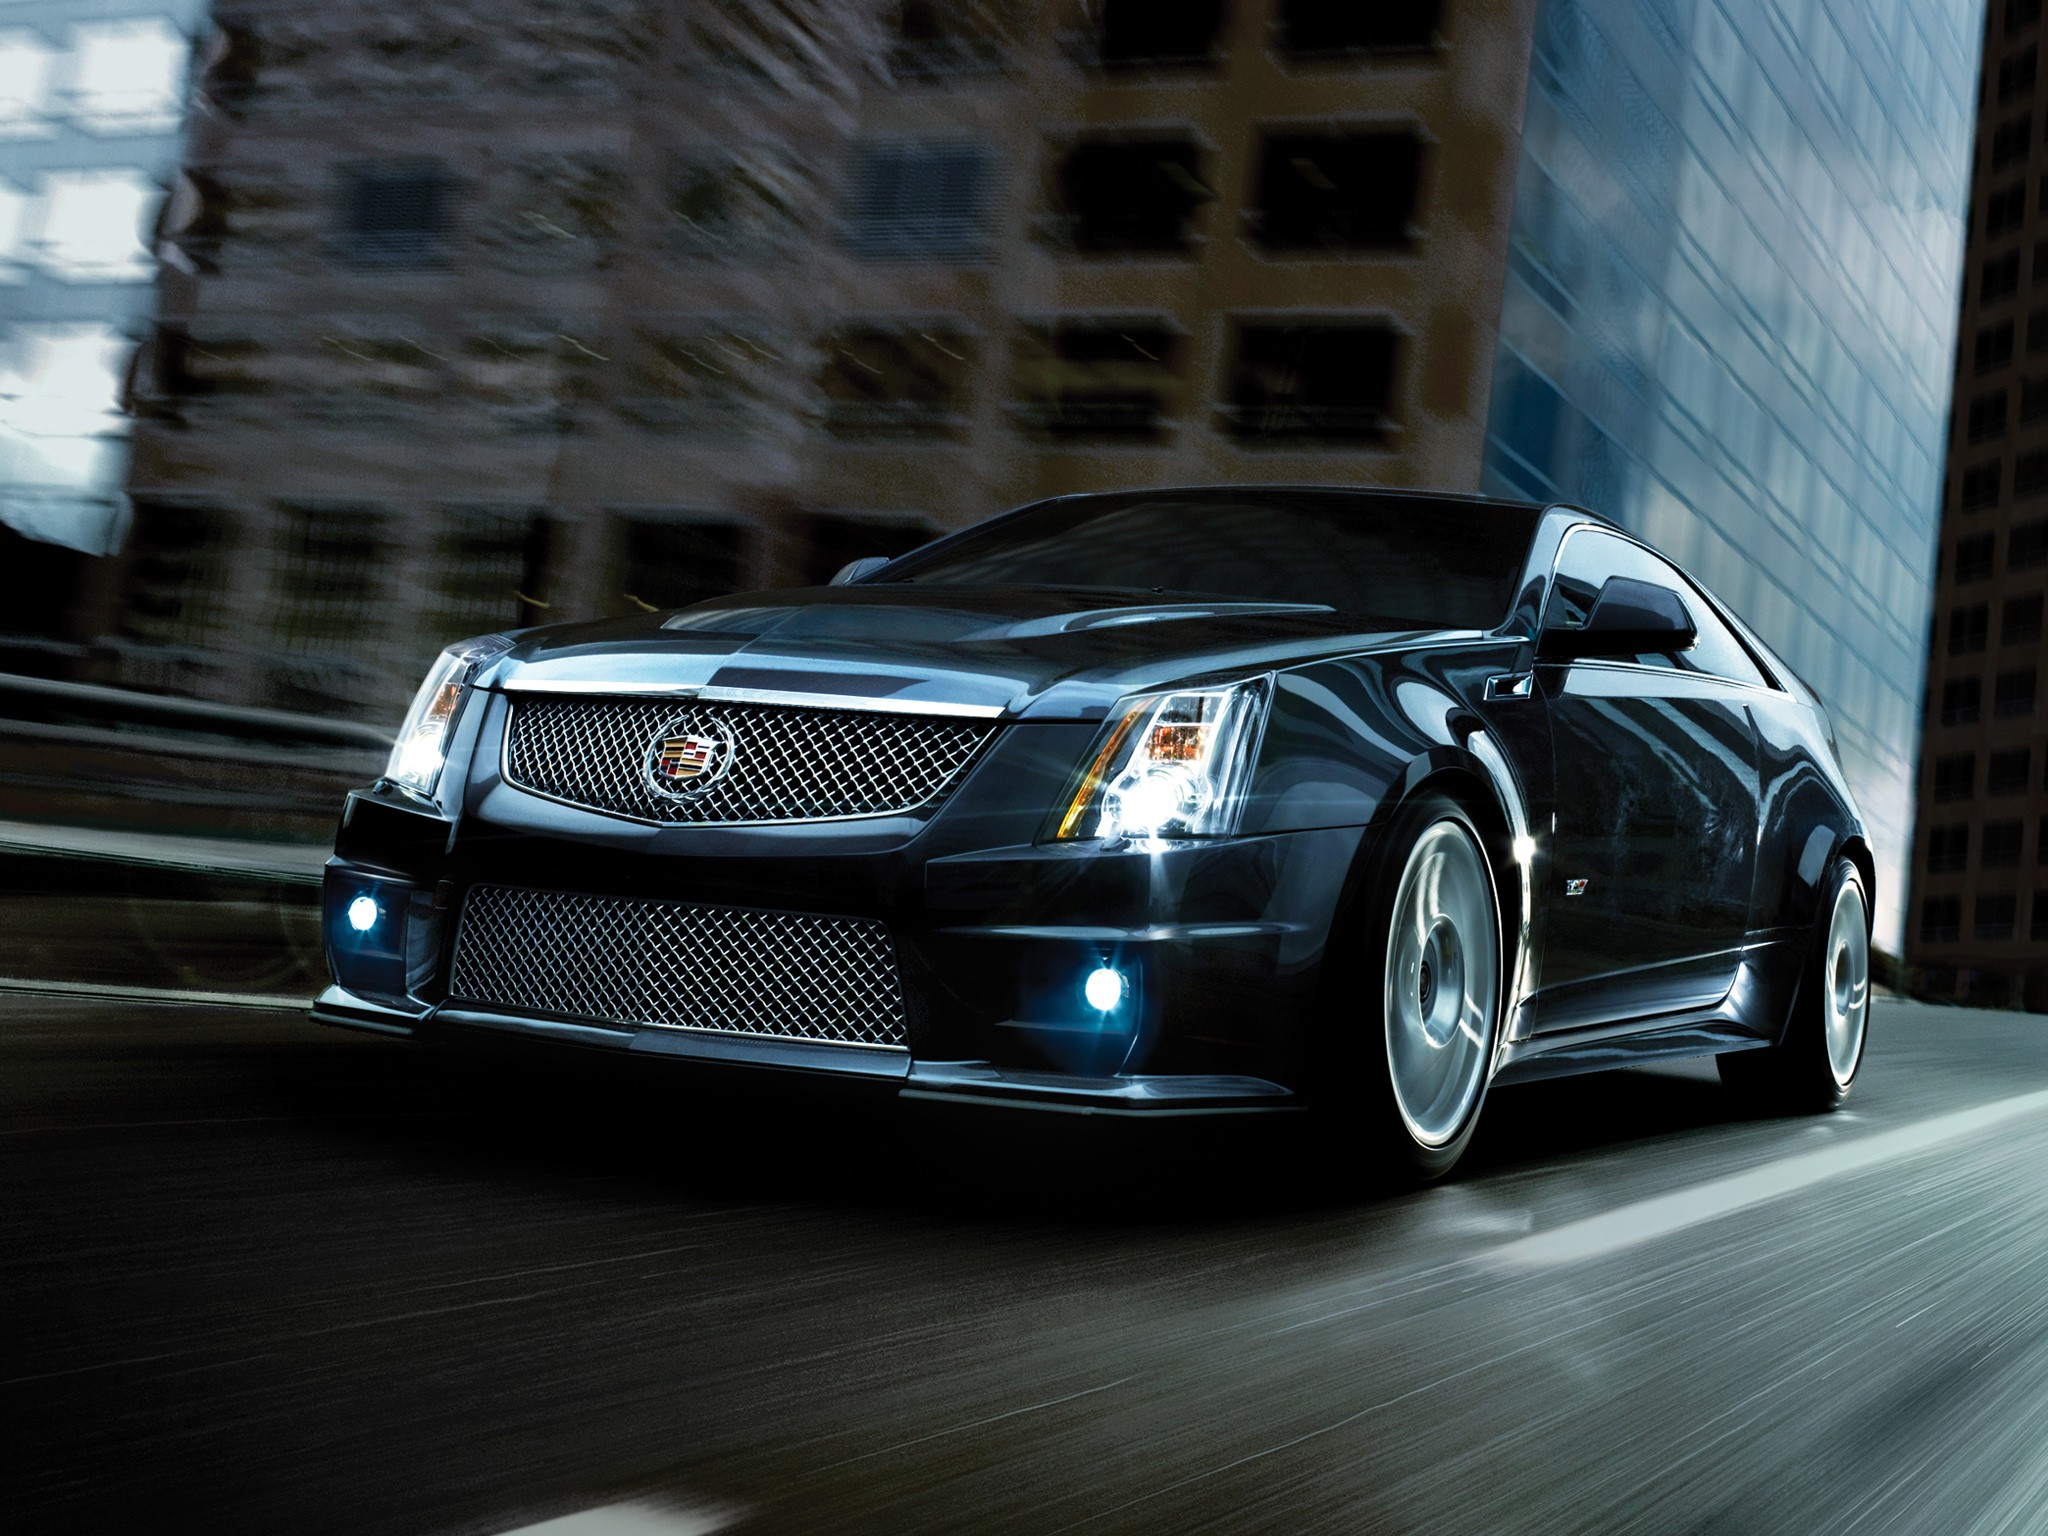 CADILLAC CTS-V Coupe specs - 2012, 2013, 2014, 2015, 2016, 2017, 2018